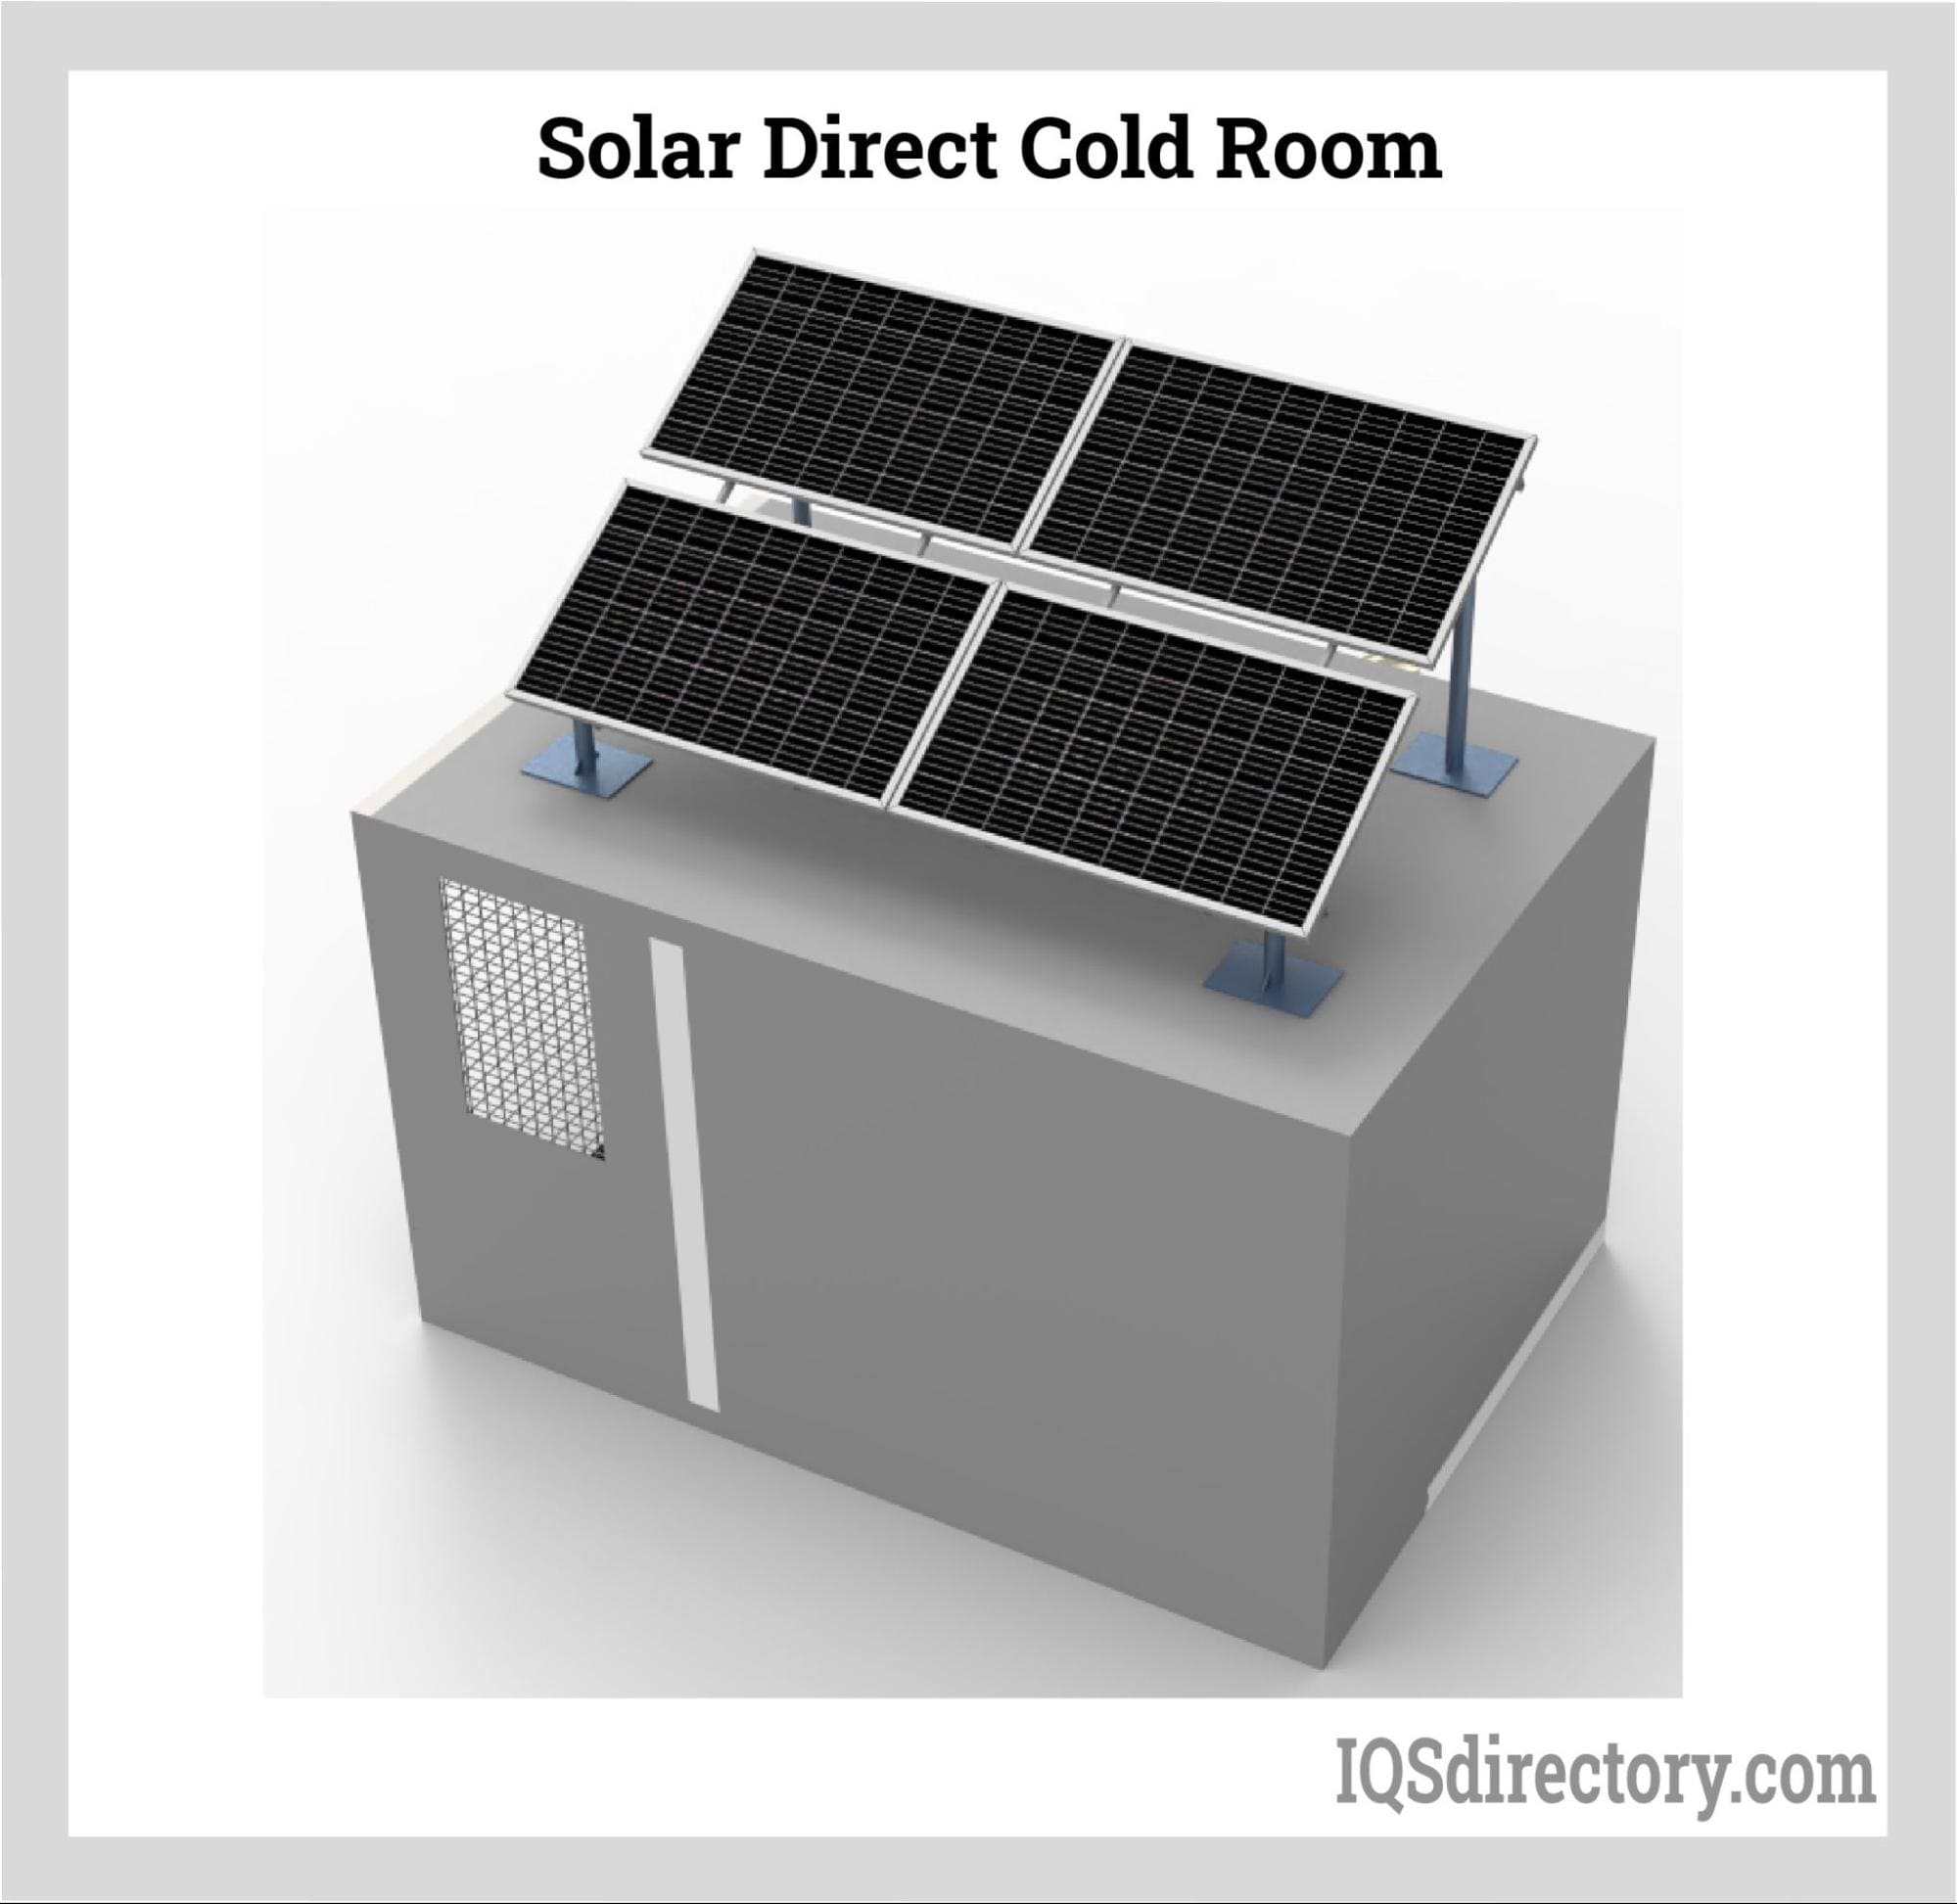 Solar Direct Cold Room